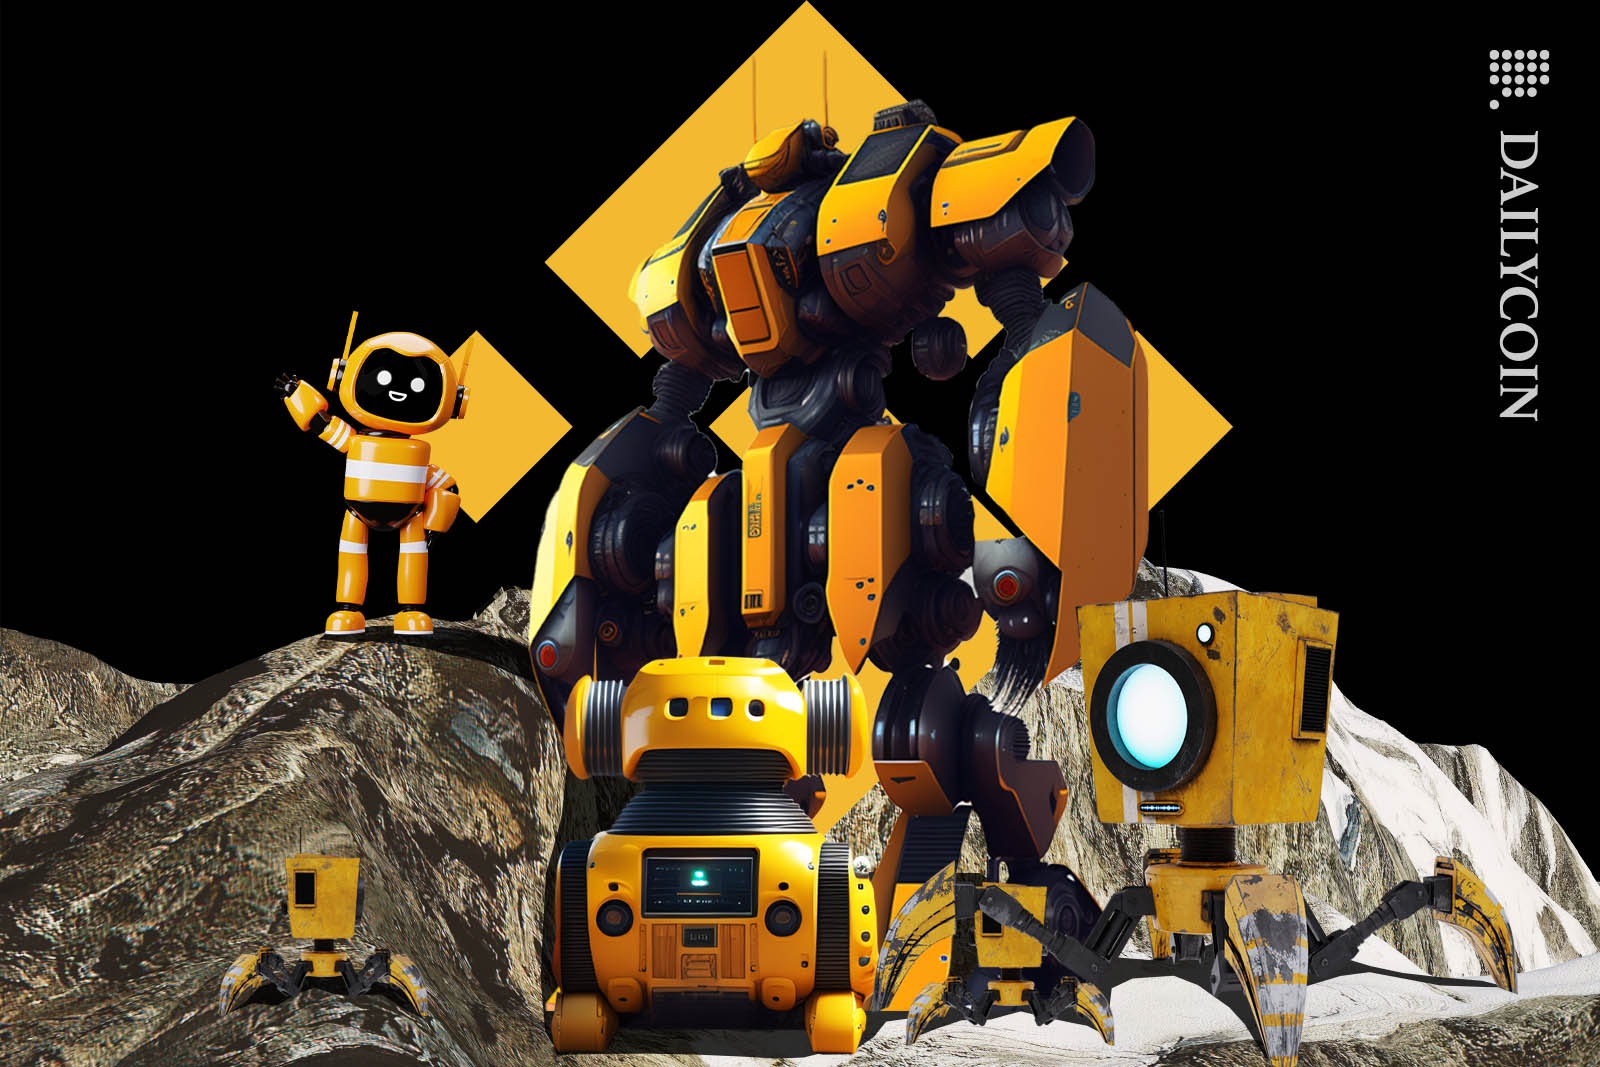 Bunch of yellow robots standing on a montain top infront of a Binance logo.